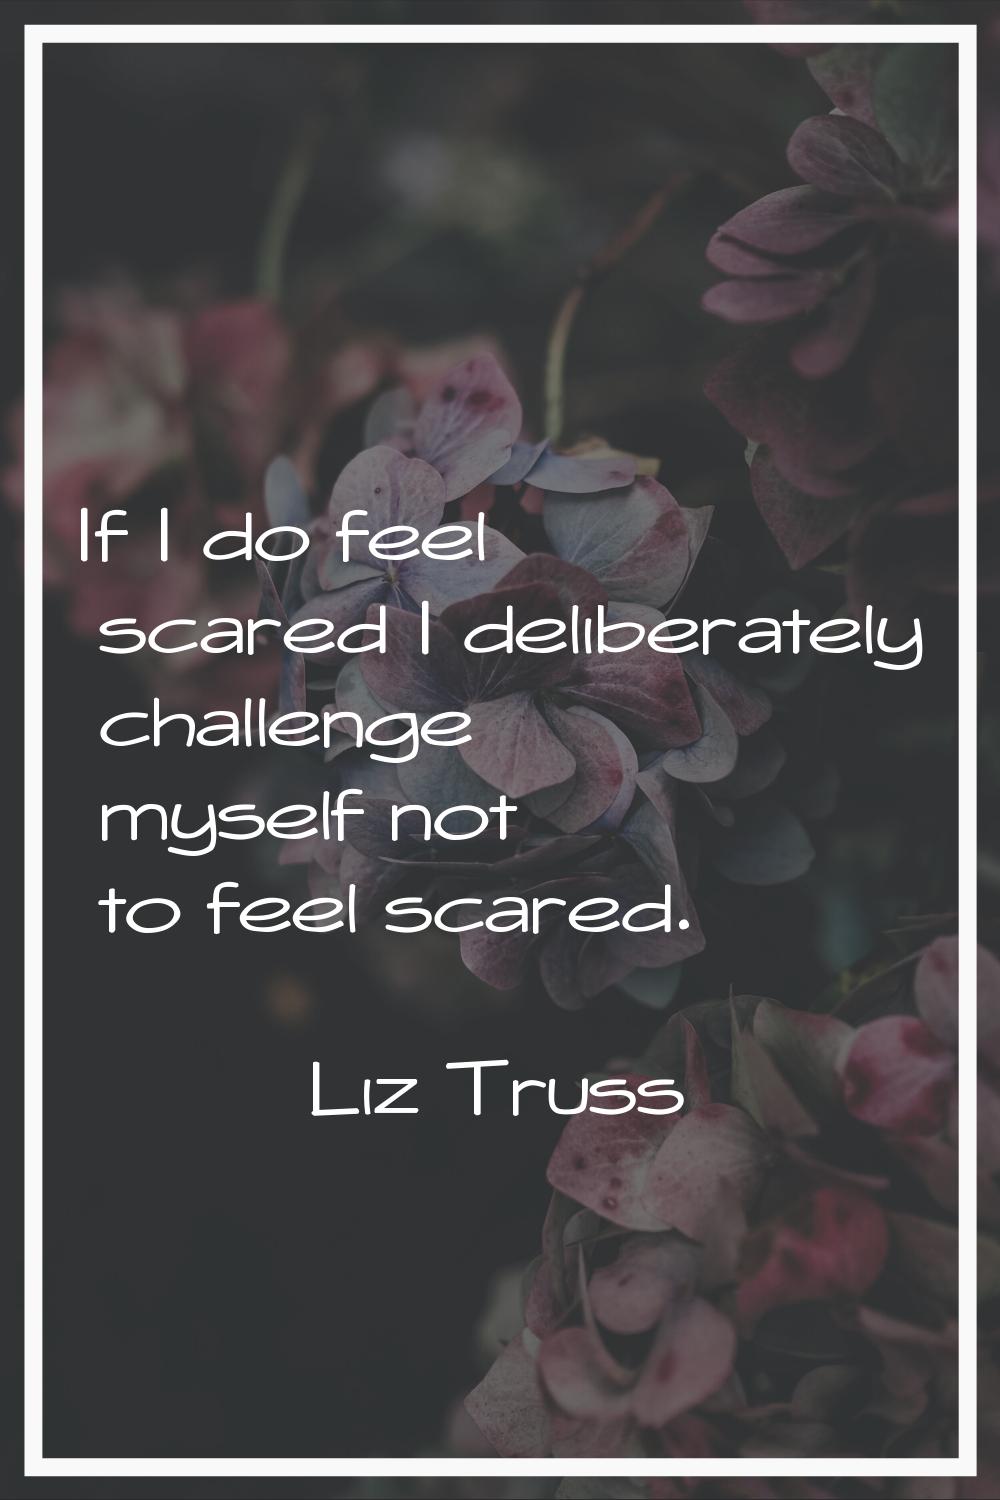 If I do feel scared I deliberately challenge myself not to feel scared.